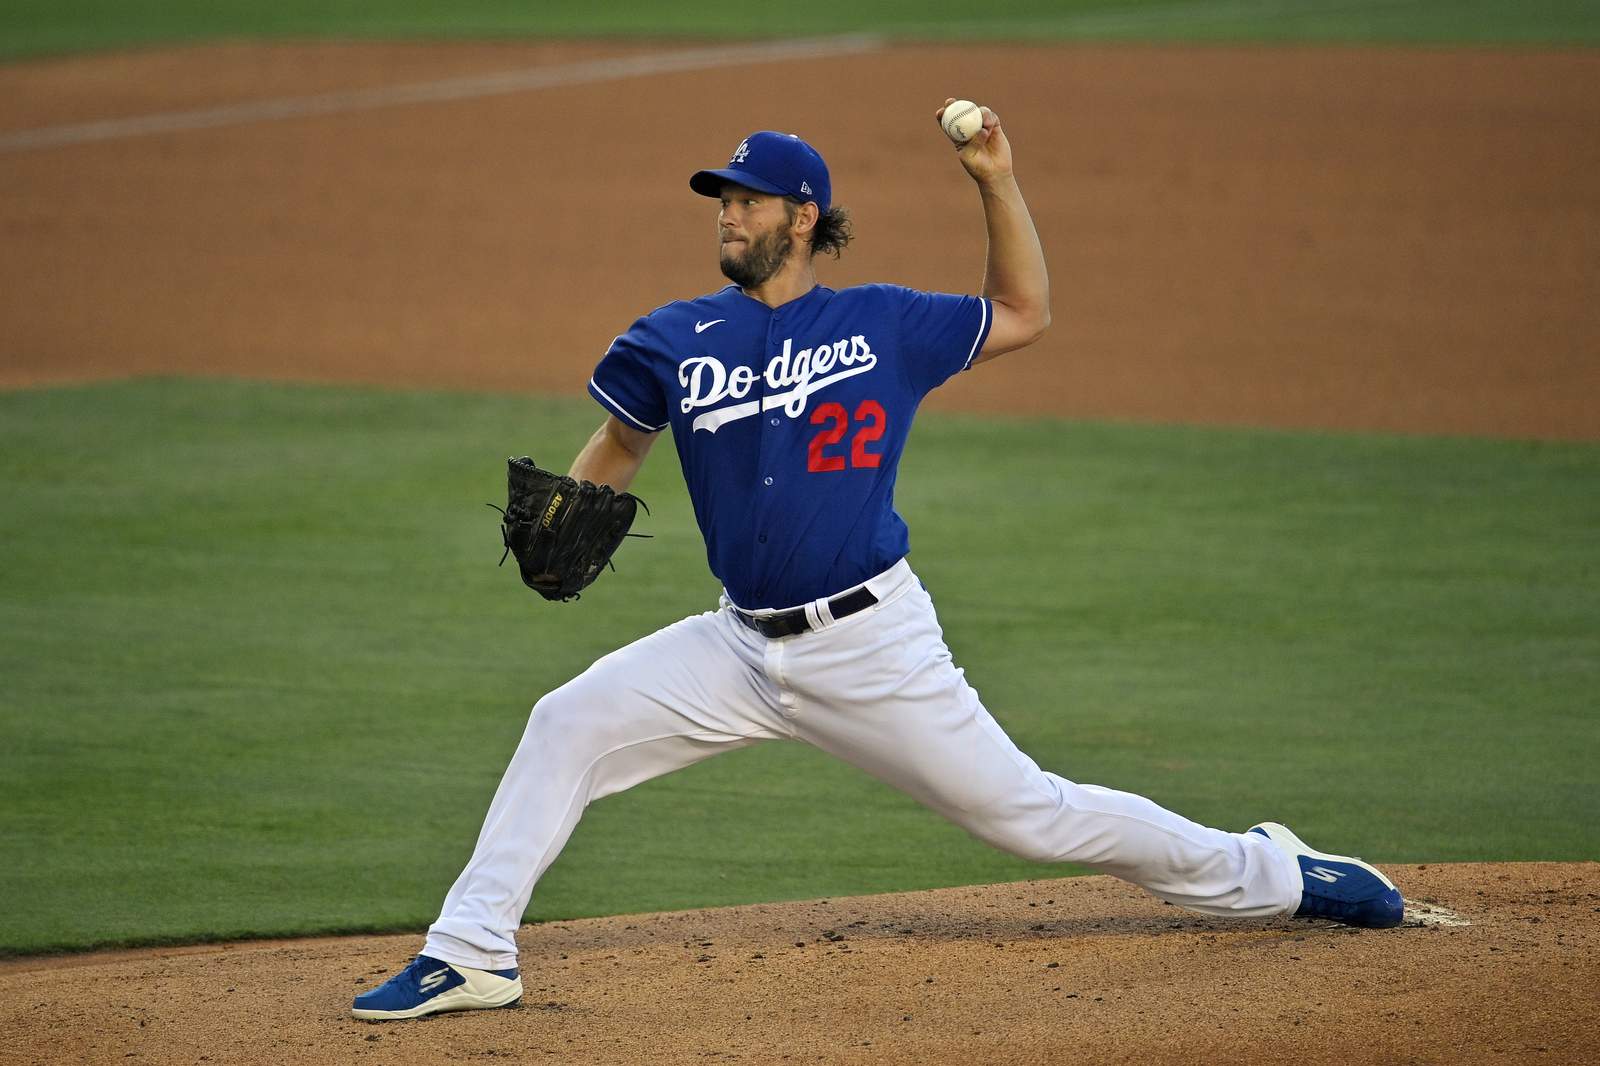 Kershaw: Back issue 'not too serious,' expects return soon